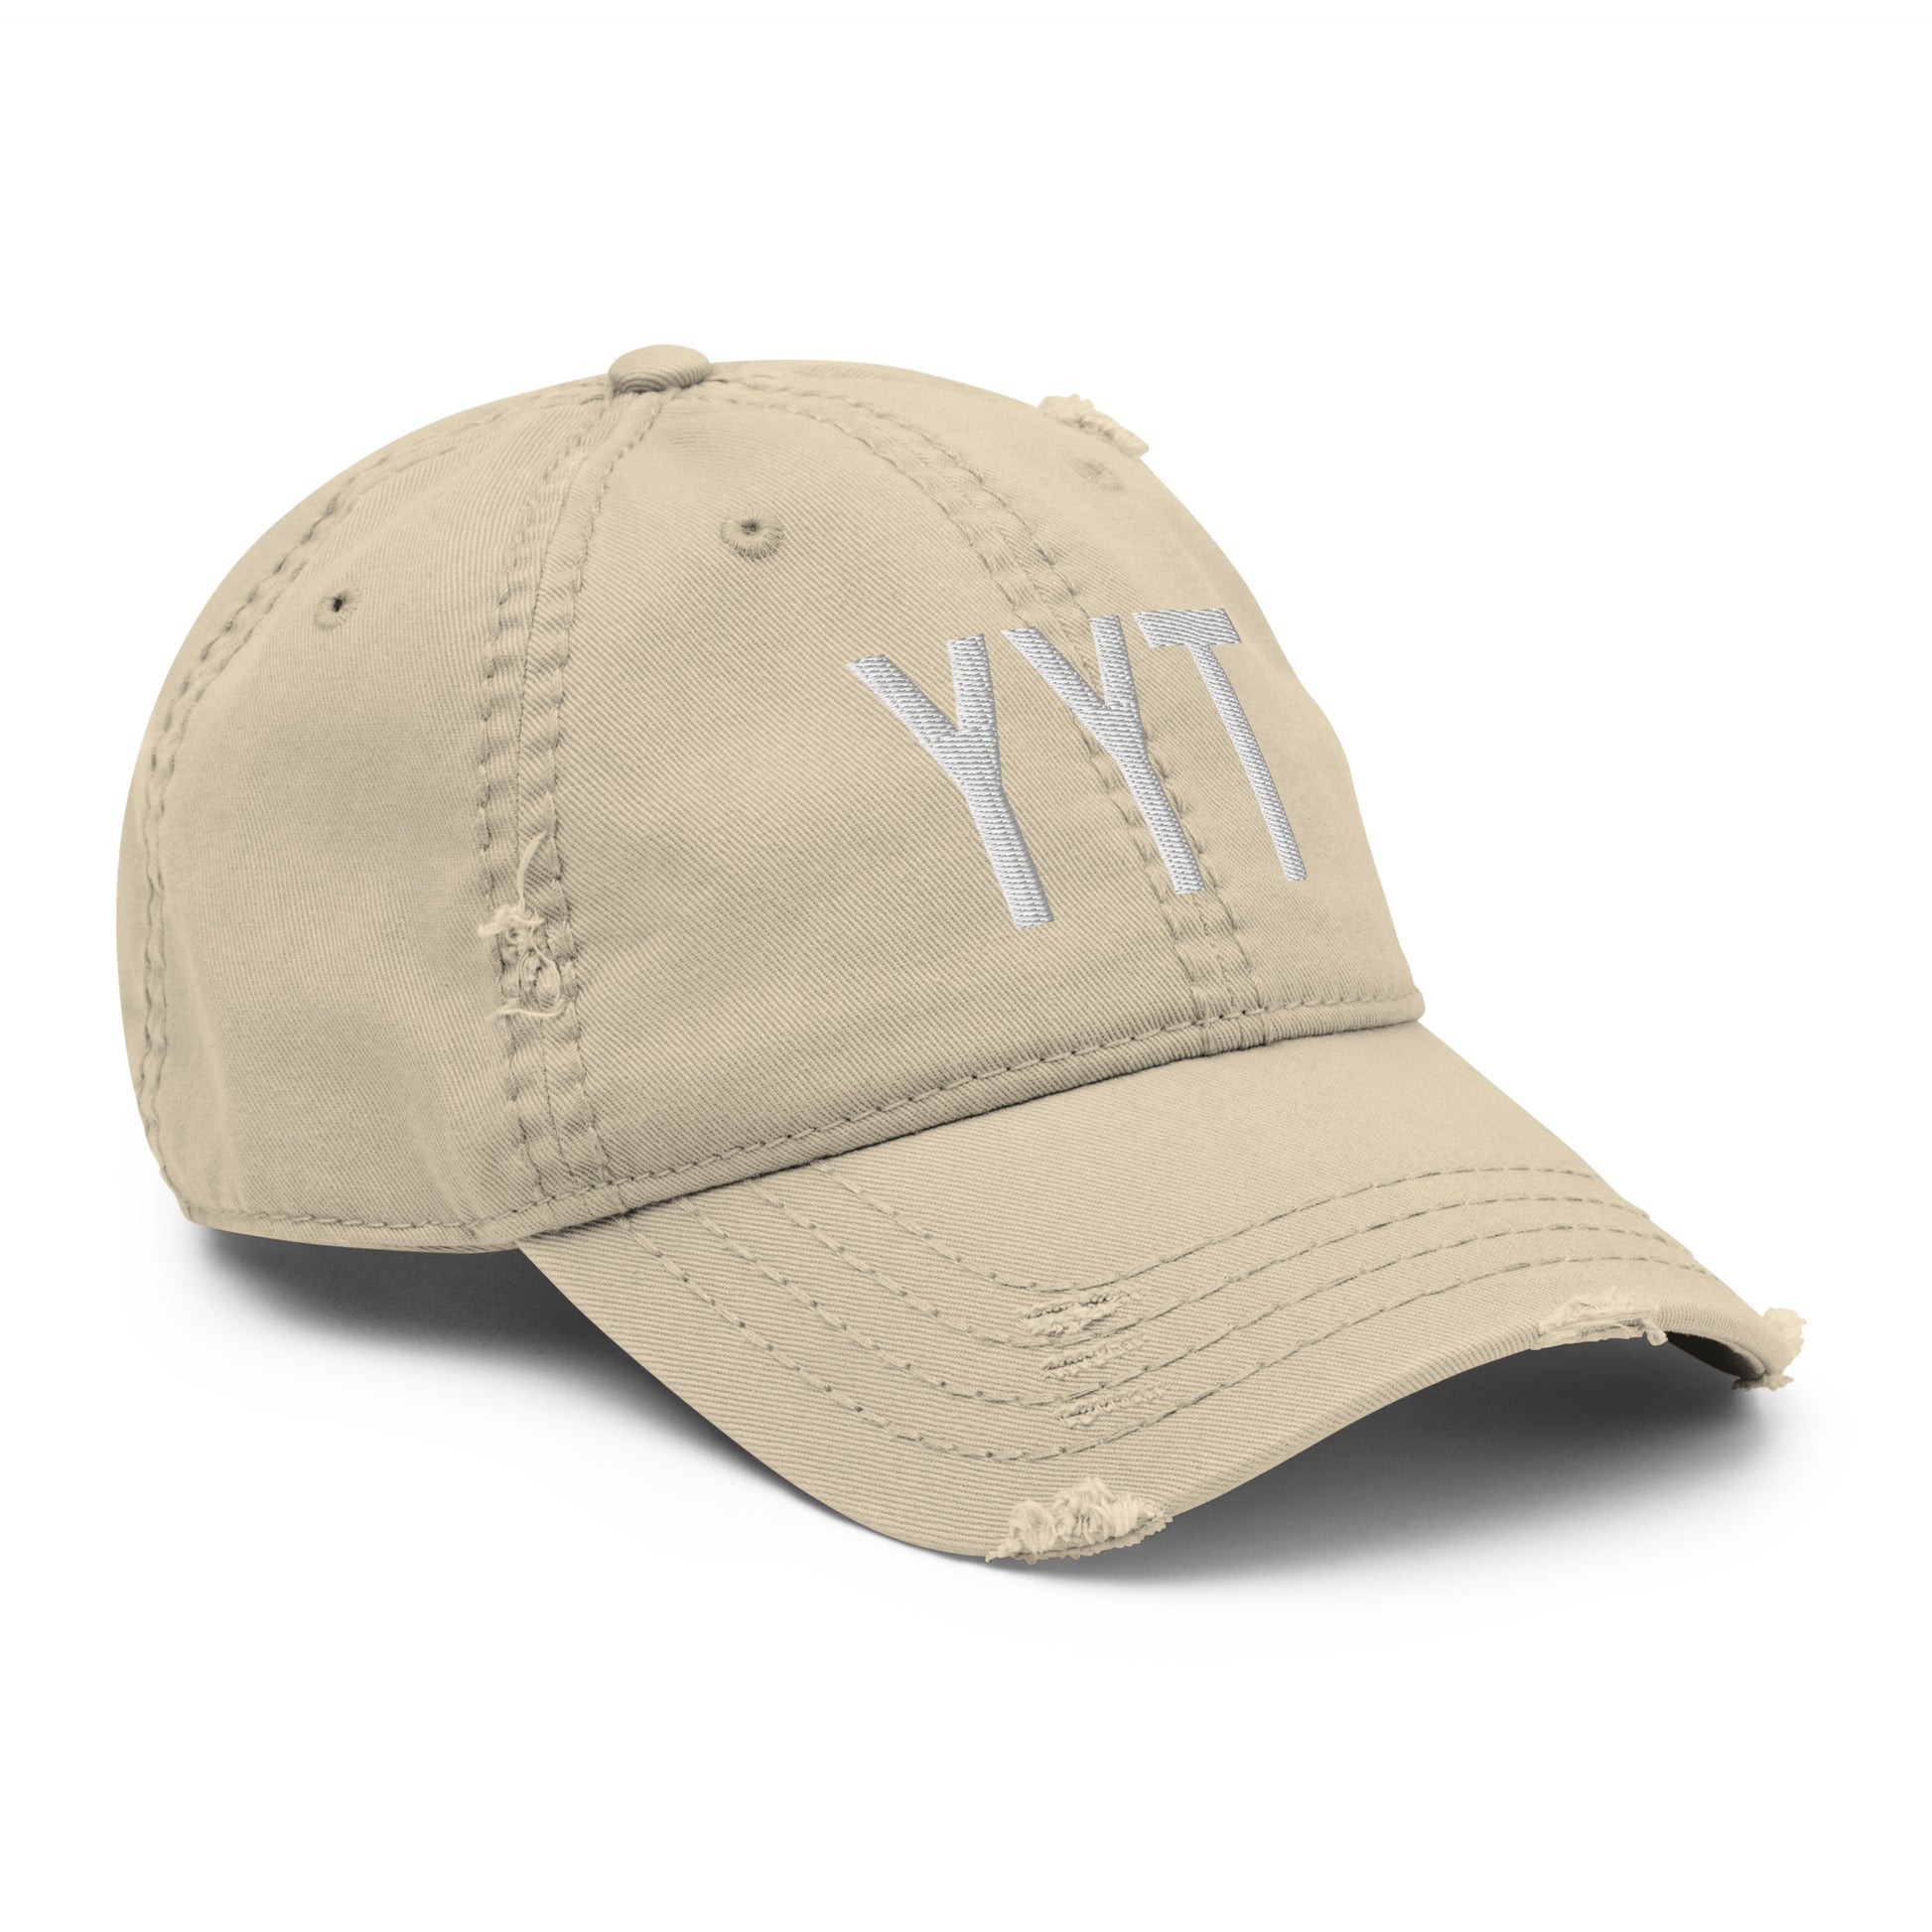 Airport Code Distressed Hat - White • YYT St. John's • YHM Designs - Image 20